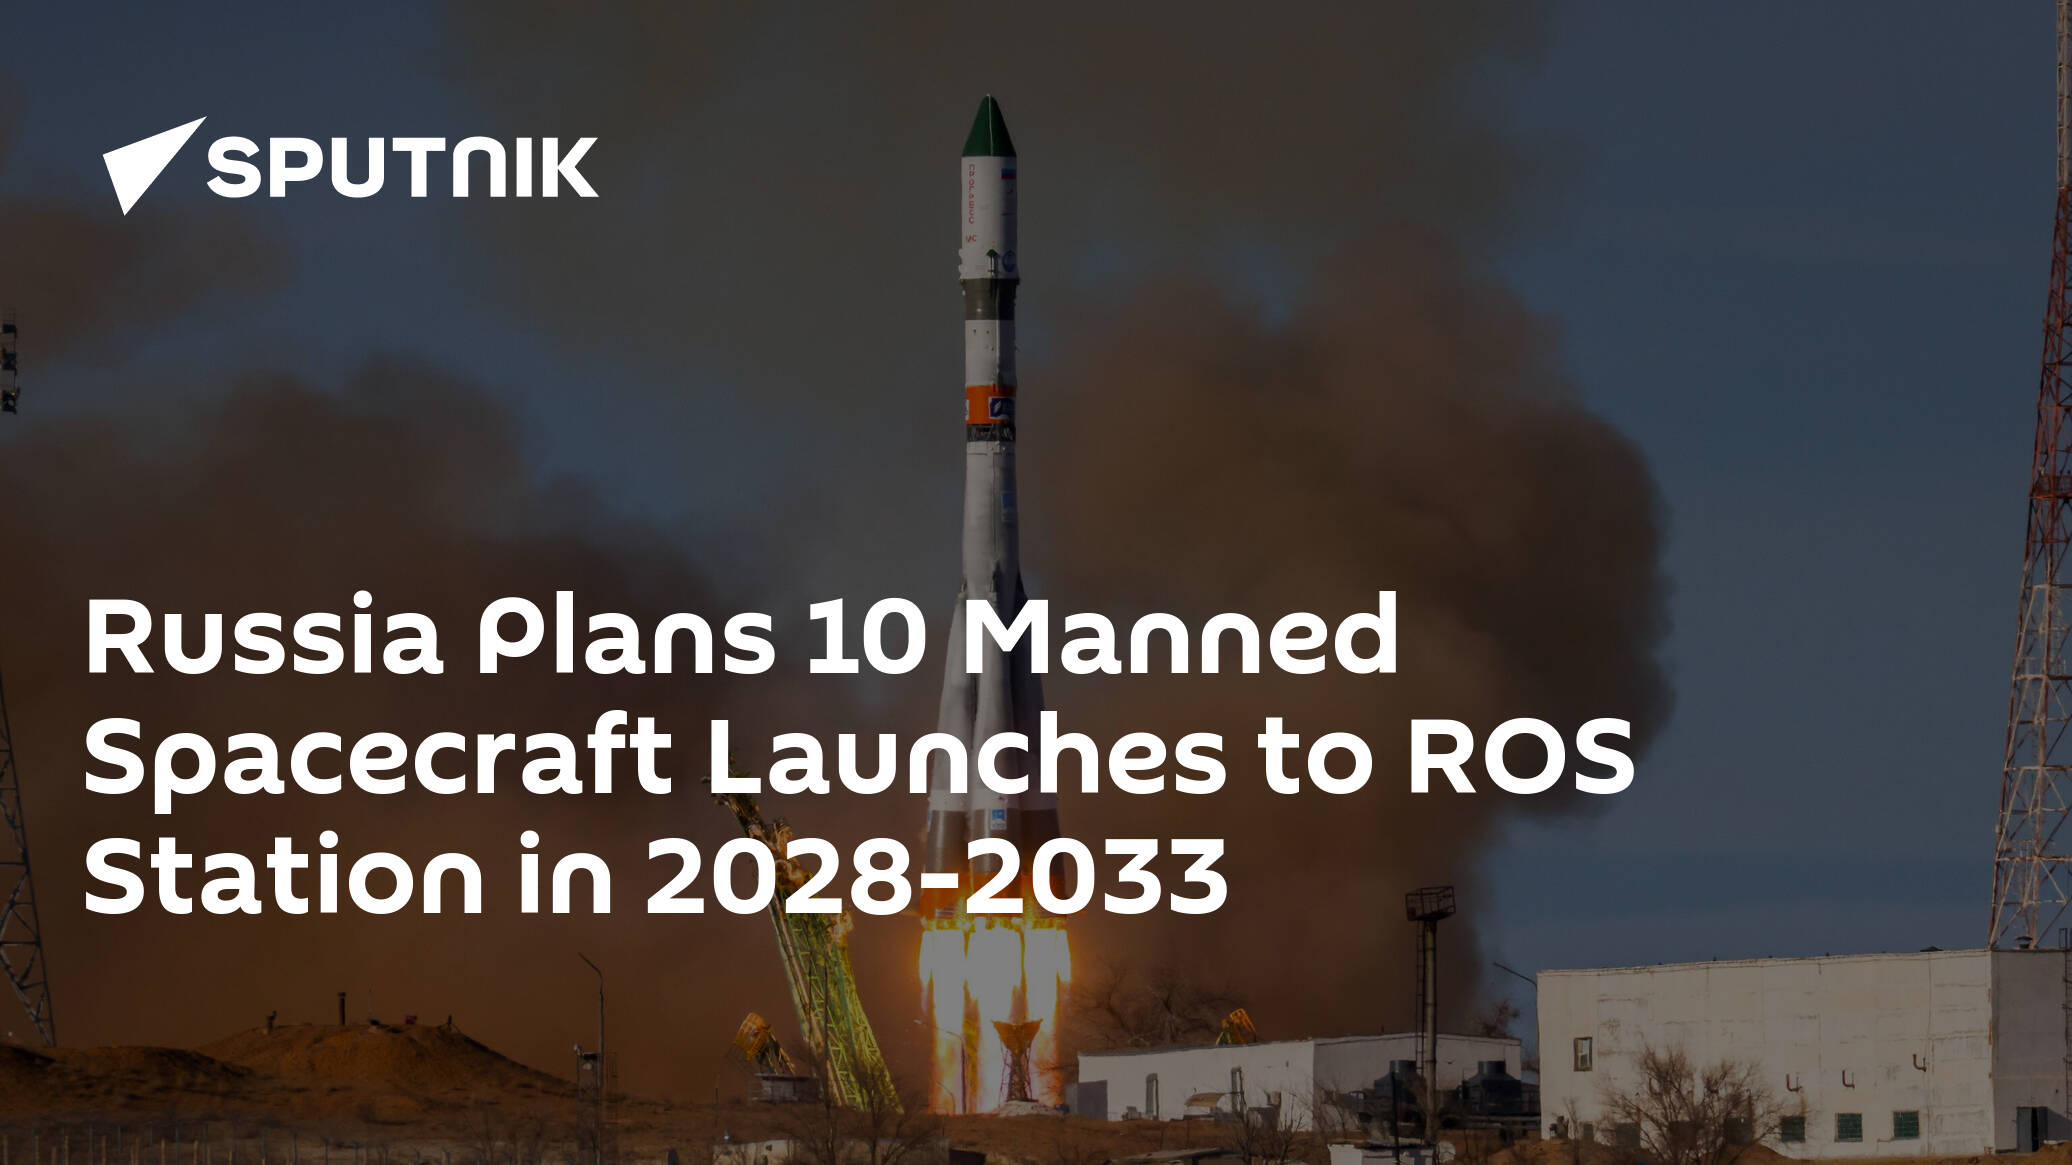 Russia Plans 10 Manned Spacecraft Launches to ROS Station in 2028-2033